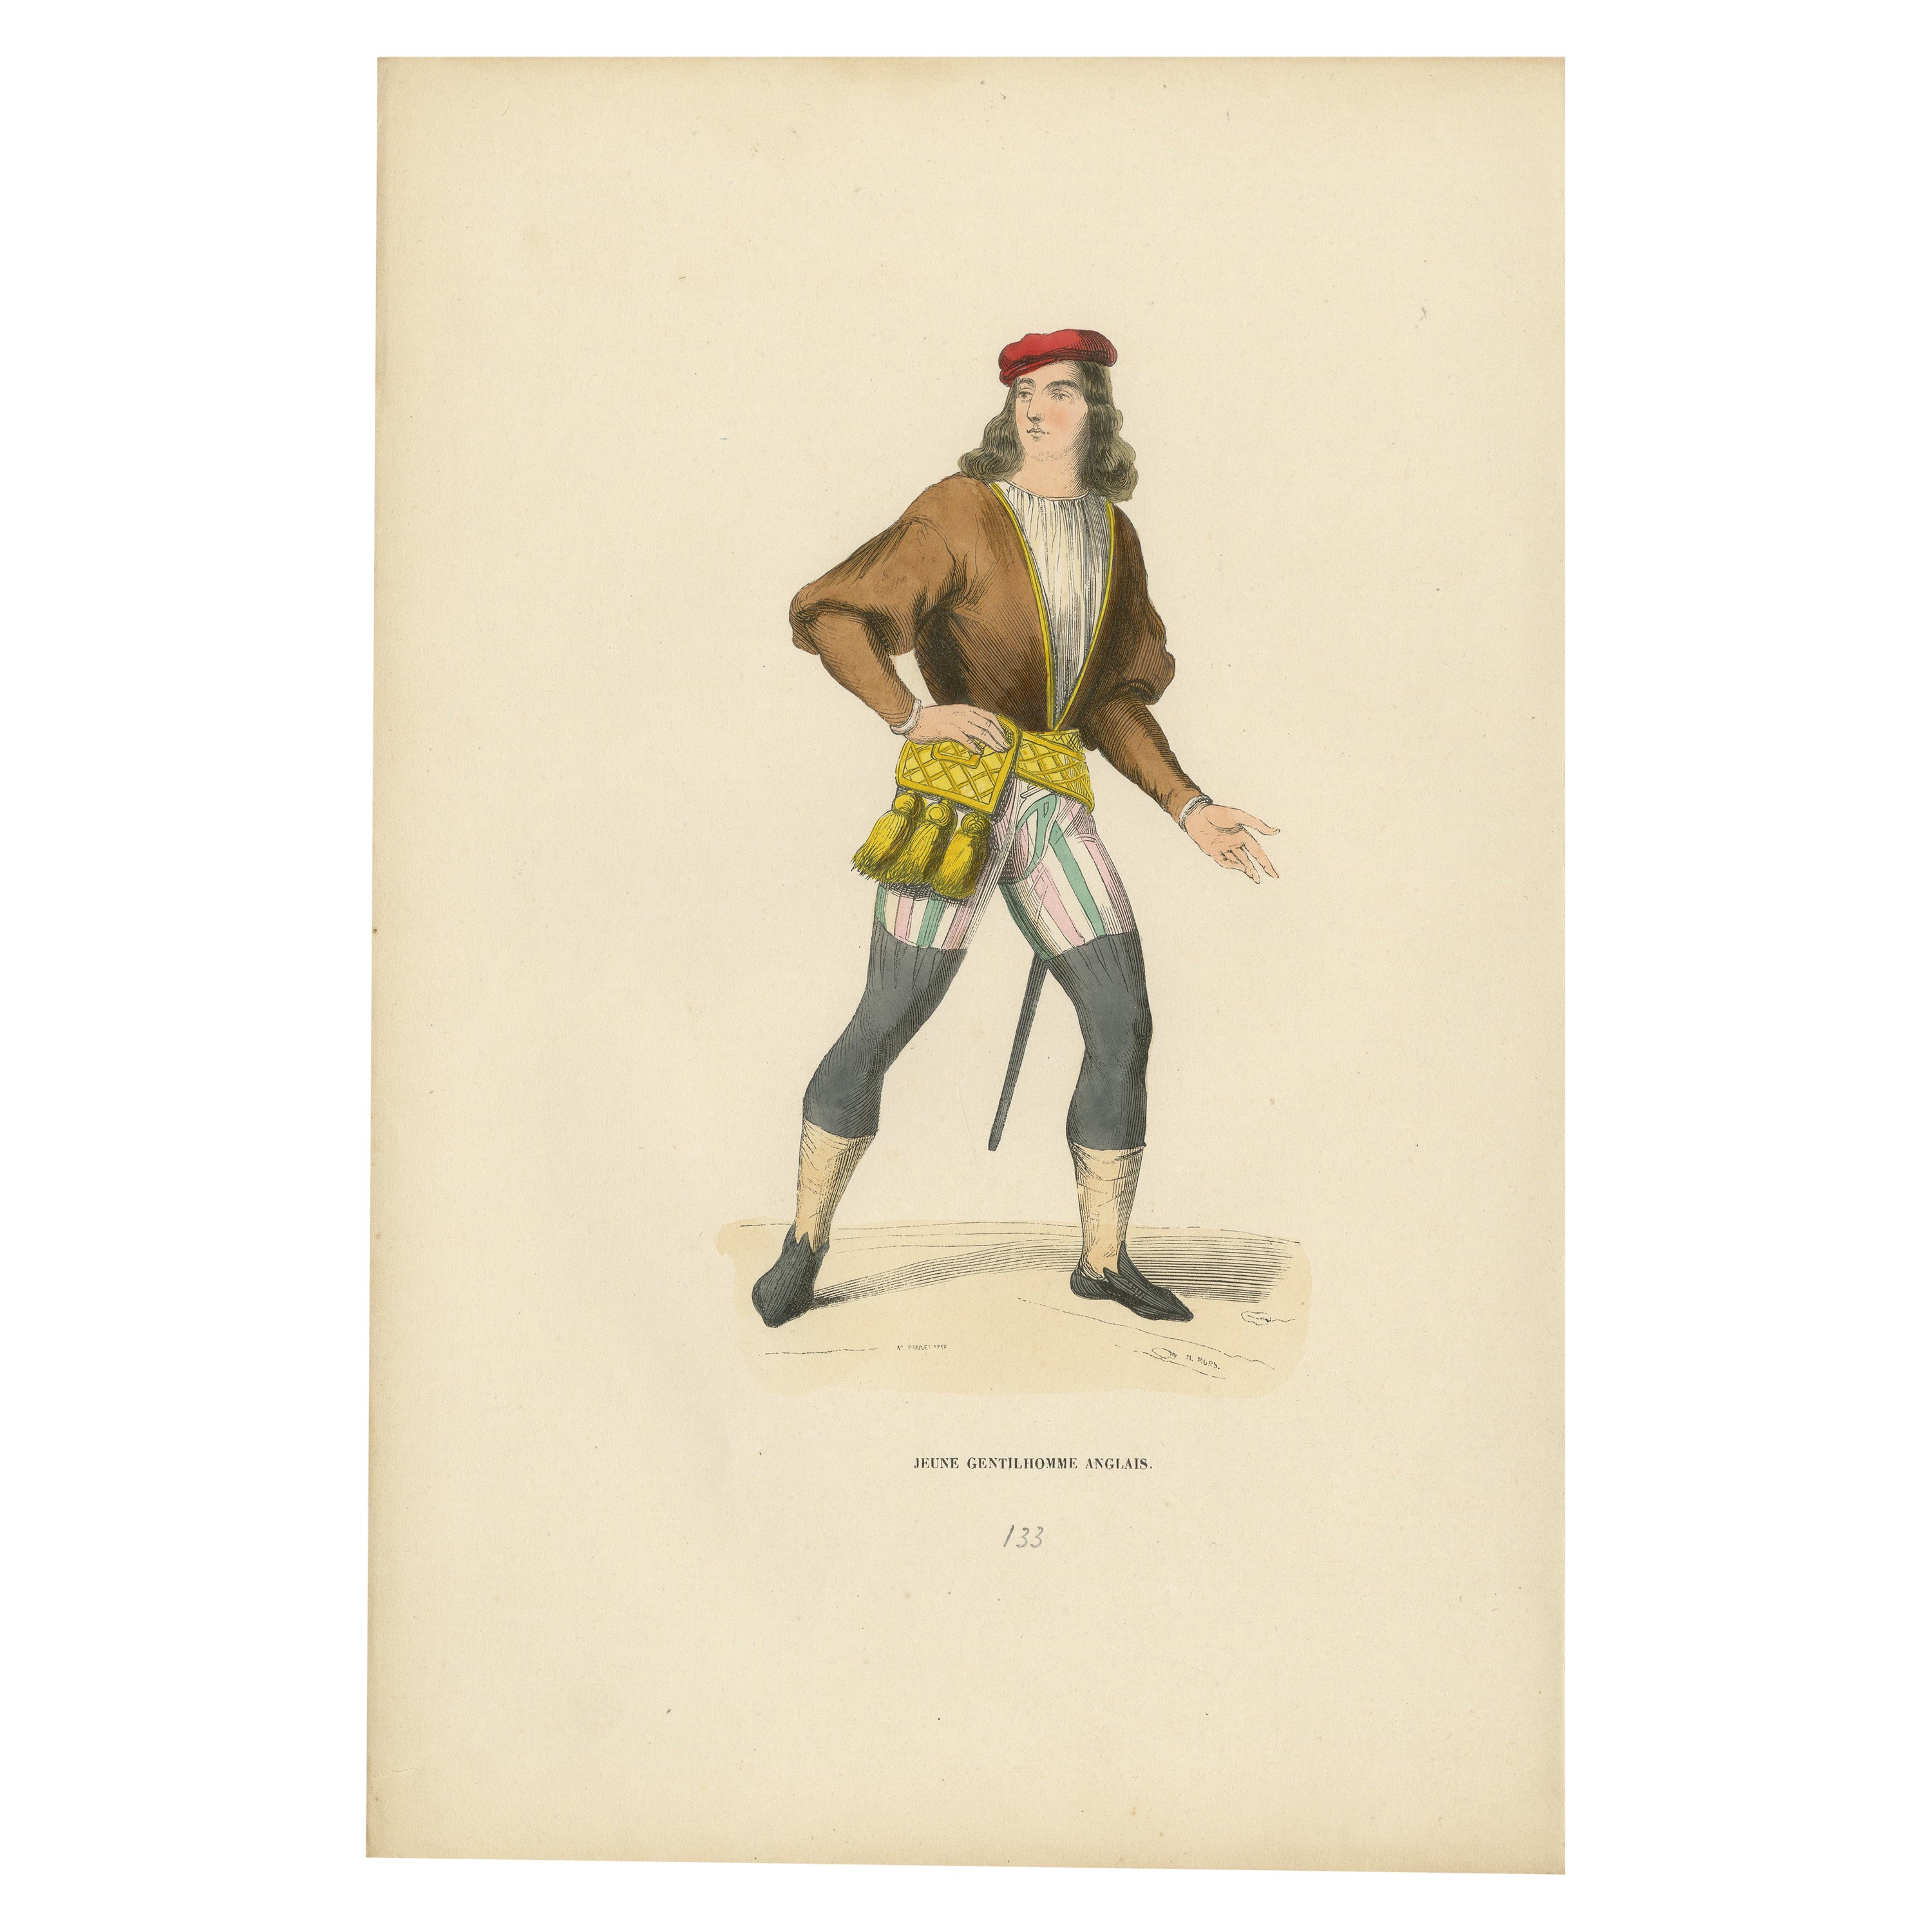 Stylish Swagger: A Young English Gentleman in The Middle Ages, Published in 1847